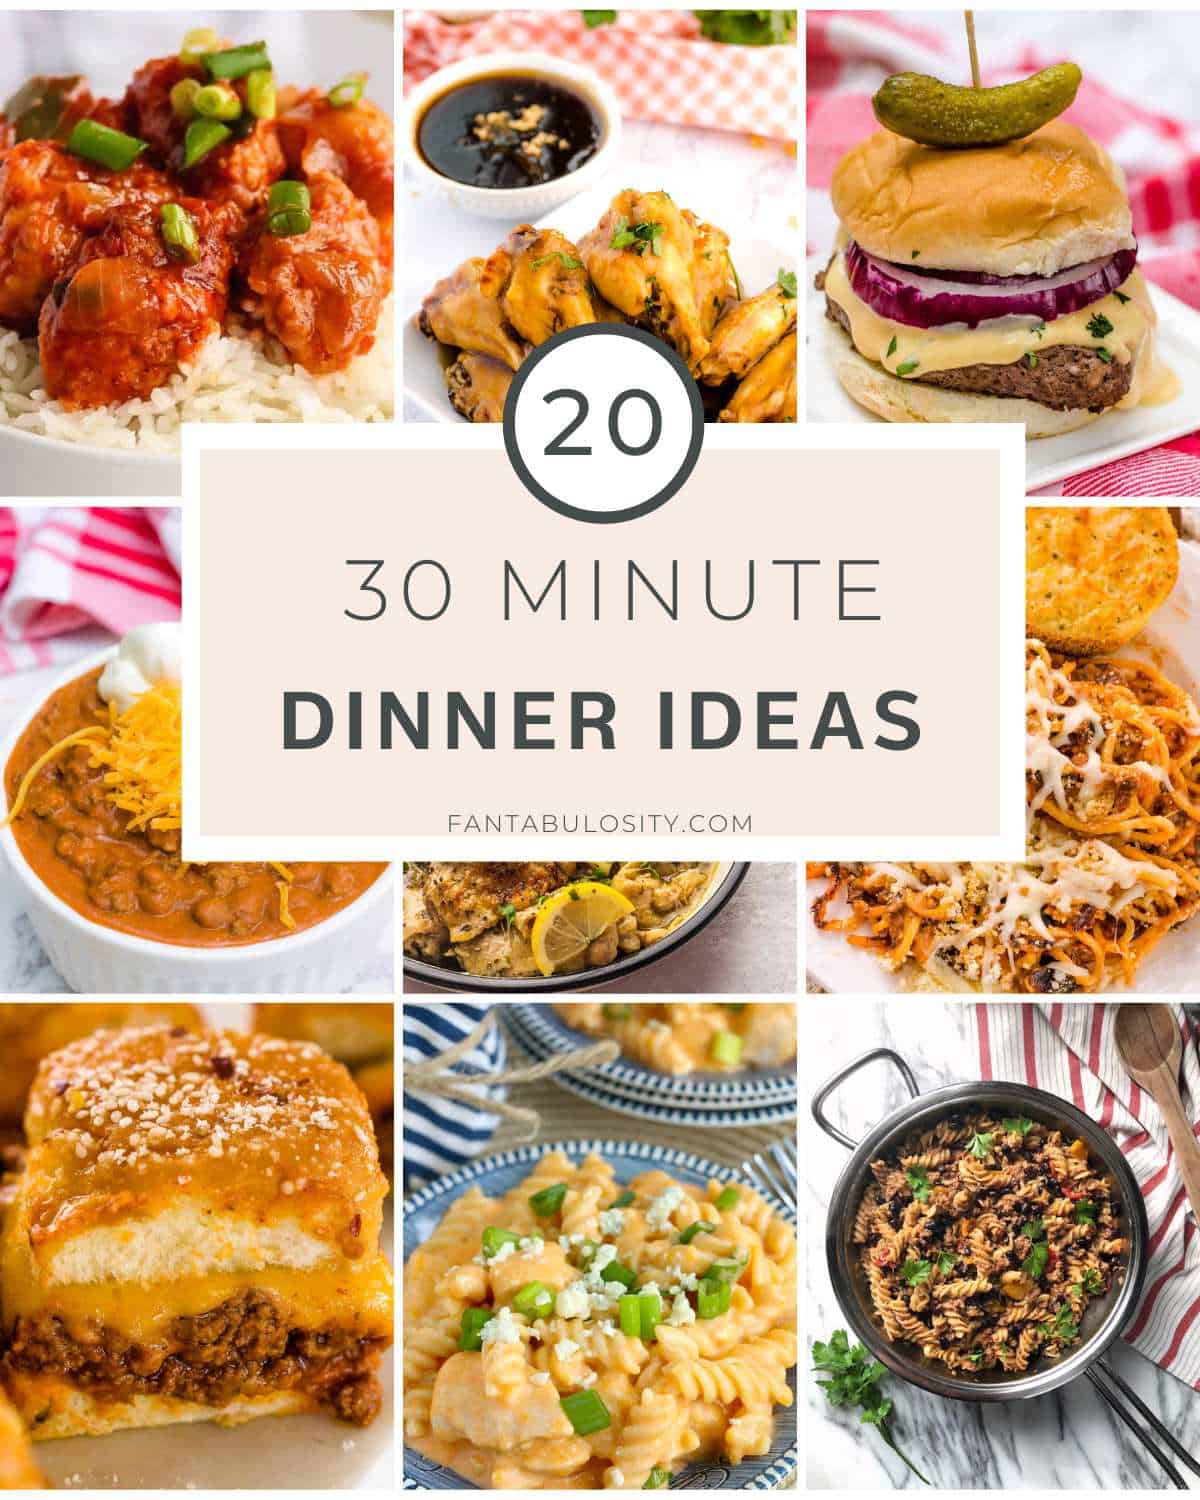 30 minute dinner ideas collage with text overlay.